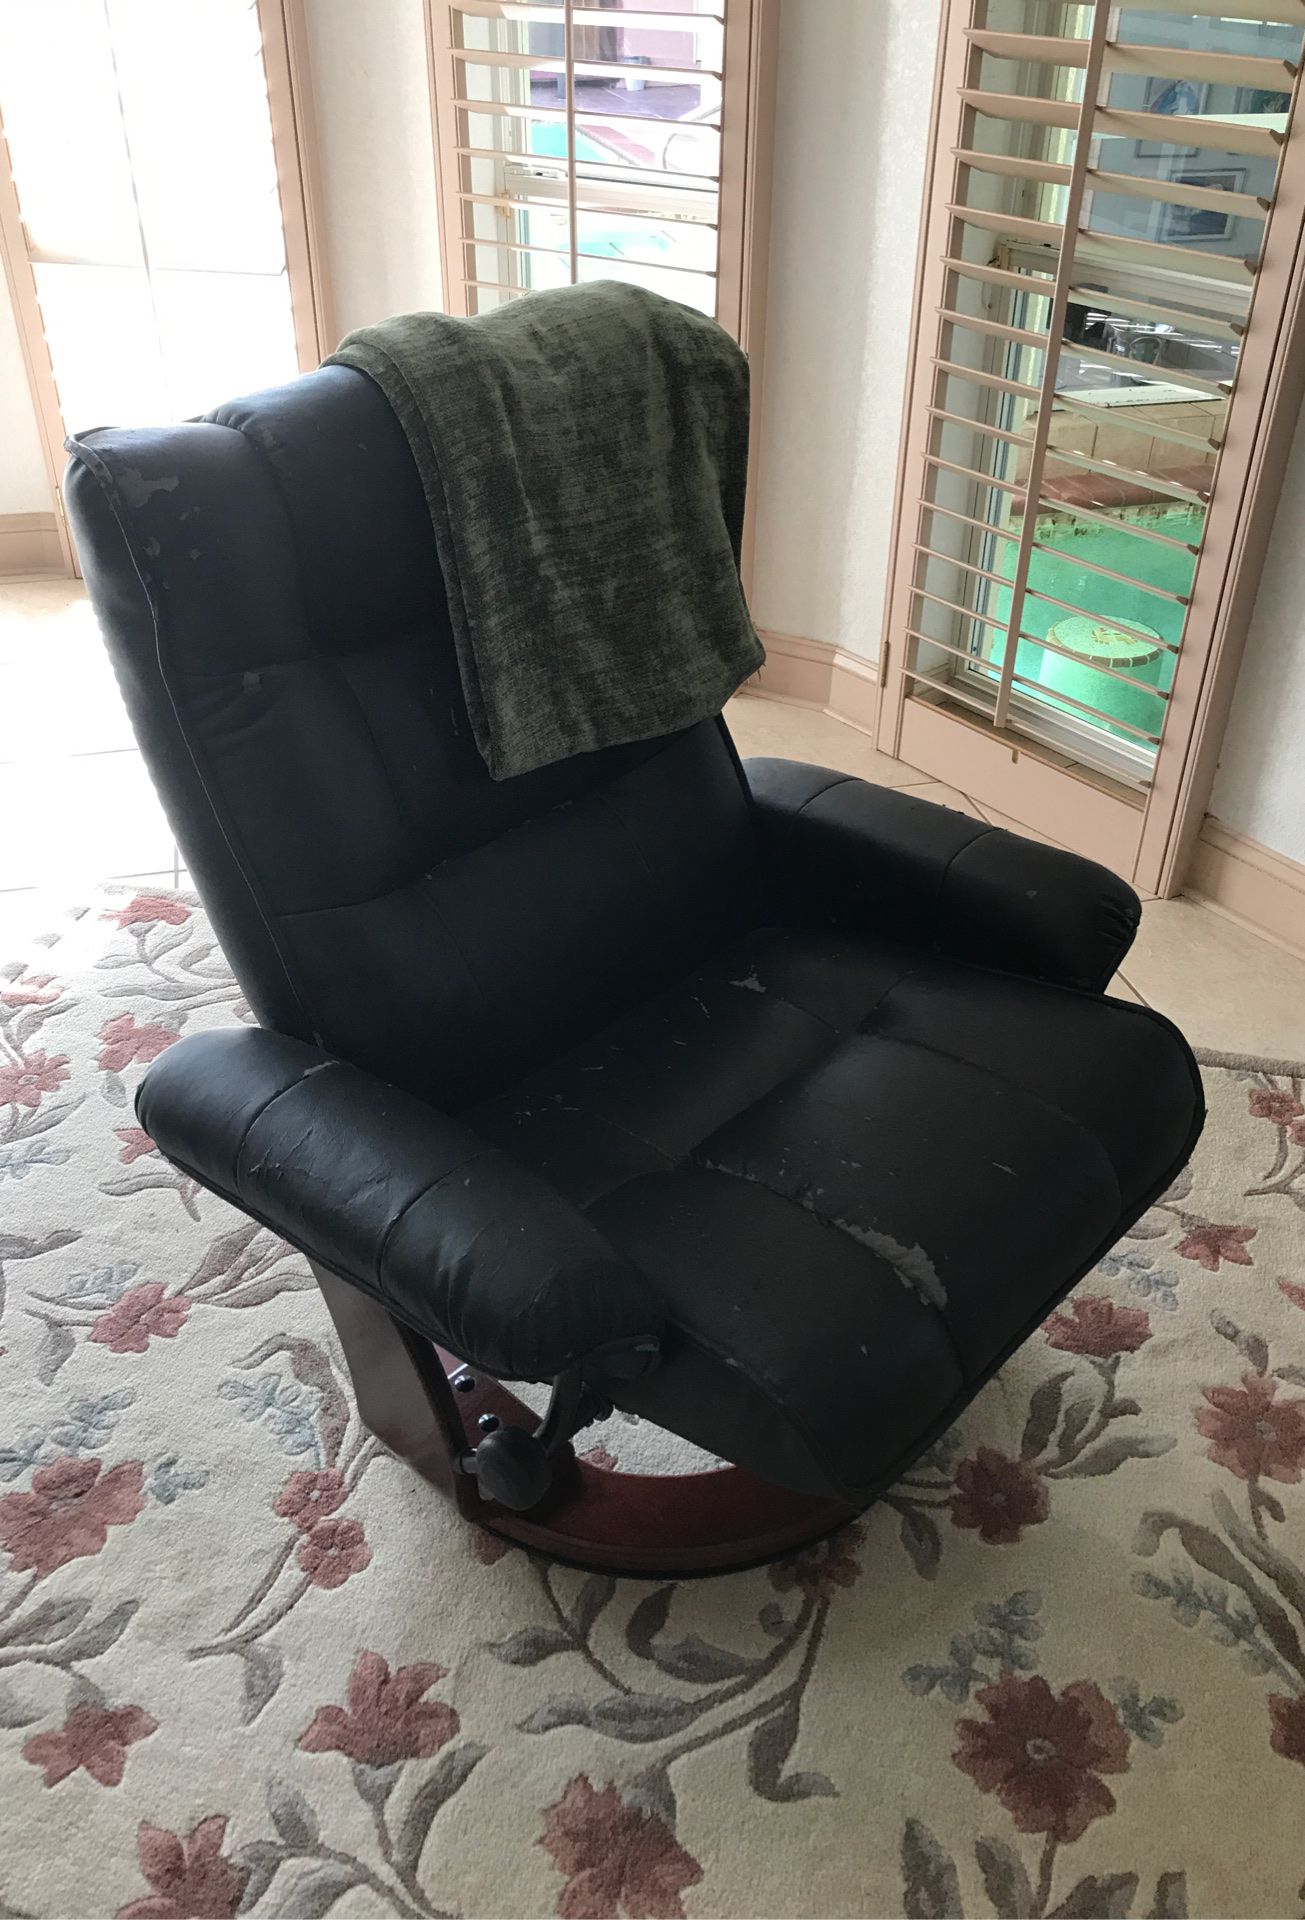 Very Sturdy adjusting Armchair Recliner with solid Hardwood/Metal Base. Color bonded Black Leather!